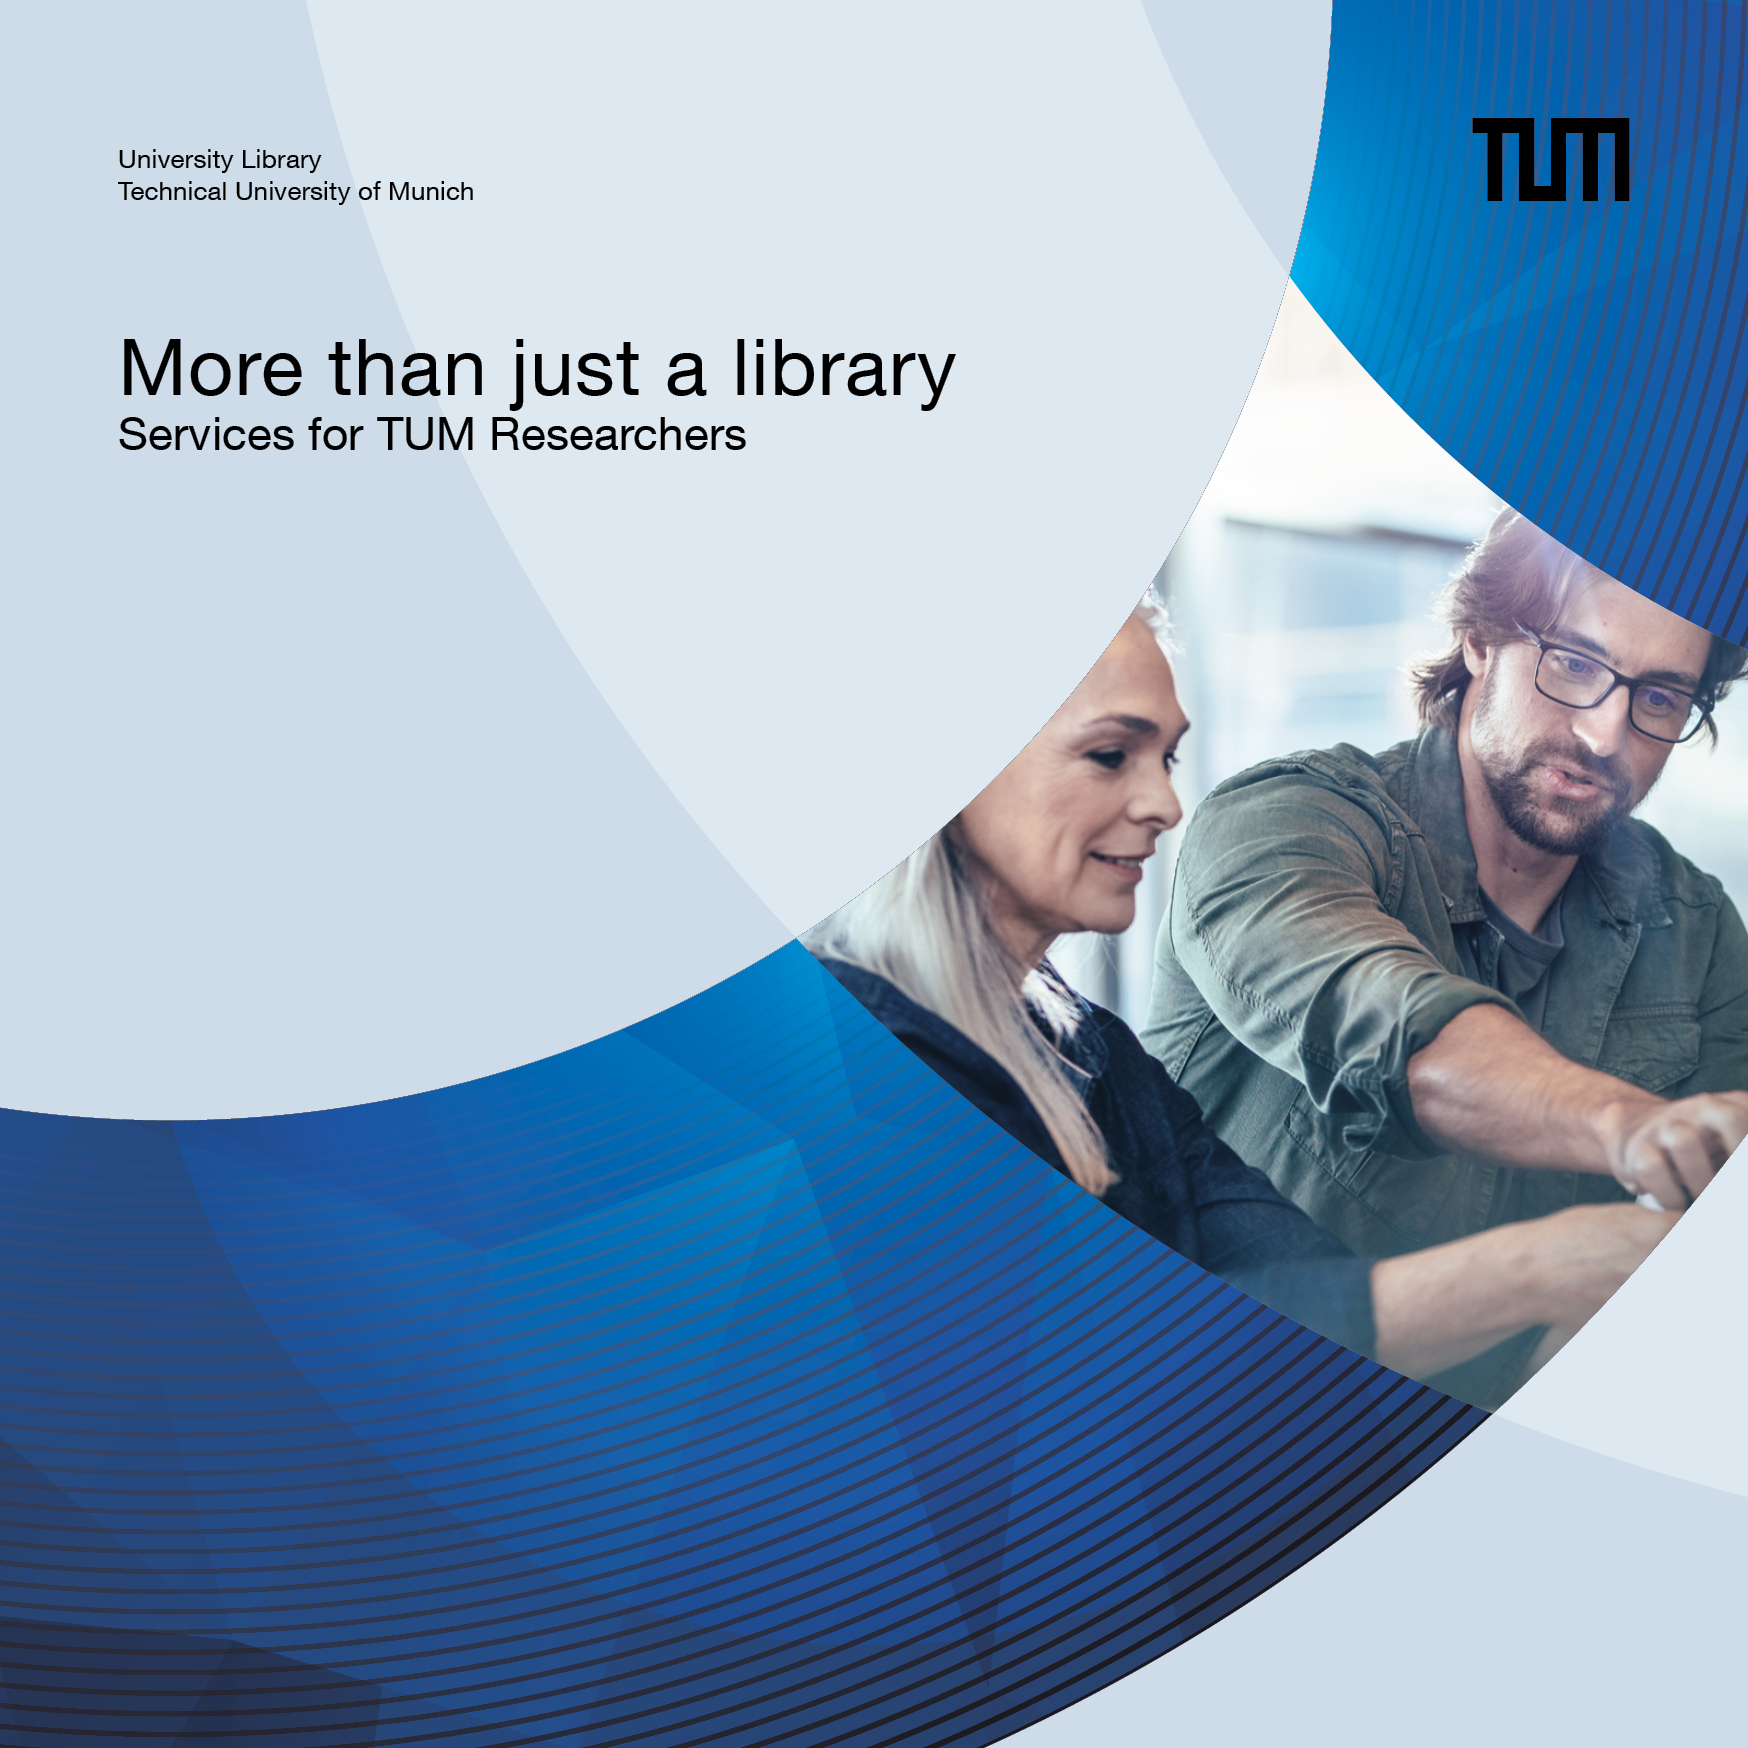  More than just a library – Services for TUM researchers